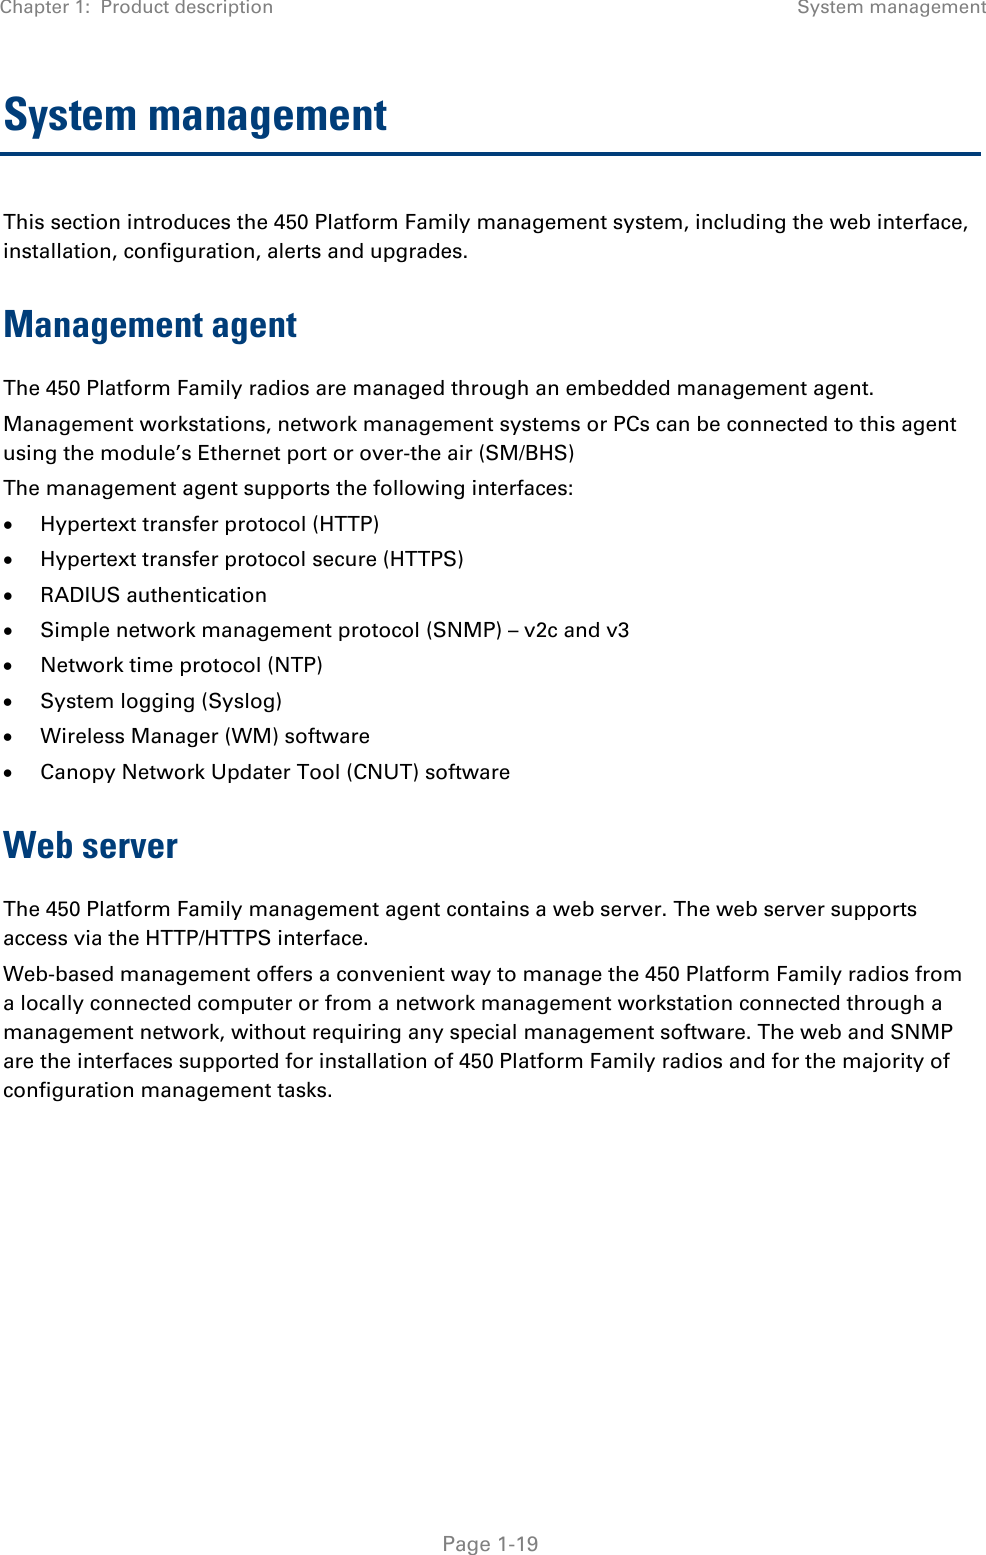 Chapter 1:  Product description System management   Page 1-19 System management This section introduces the 450 Platform Family management system, including the web interface, installation, configuration, alerts and upgrades. Management agent The 450 Platform Family radios are managed through an embedded management agent.  Management workstations, network management systems or PCs can be connected to this agent using the module’s Ethernet port or over-the air (SM/BHS)  The management agent supports the following interfaces:   Hypertext transfer protocol (HTTP)   Hypertext transfer protocol secure (HTTPS)  RADIUS authentication   Simple network management protocol (SNMP) – v2c and v3  Network time protocol (NTP)   System logging (Syslog)   Wireless Manager (WM) software   Canopy Network Updater Tool (CNUT) software  Web server The 450 Platform Family management agent contains a web server. The web server supports access via the HTTP/HTTPS interface. Web-based management offers a convenient way to manage the 450 Platform Family radios from a locally connected computer or from a network management workstation connected through a management network, without requiring any special management software. The web and SNMP are the interfaces supported for installation of 450 Platform Family radios and for the majority of  configuration management tasks.    